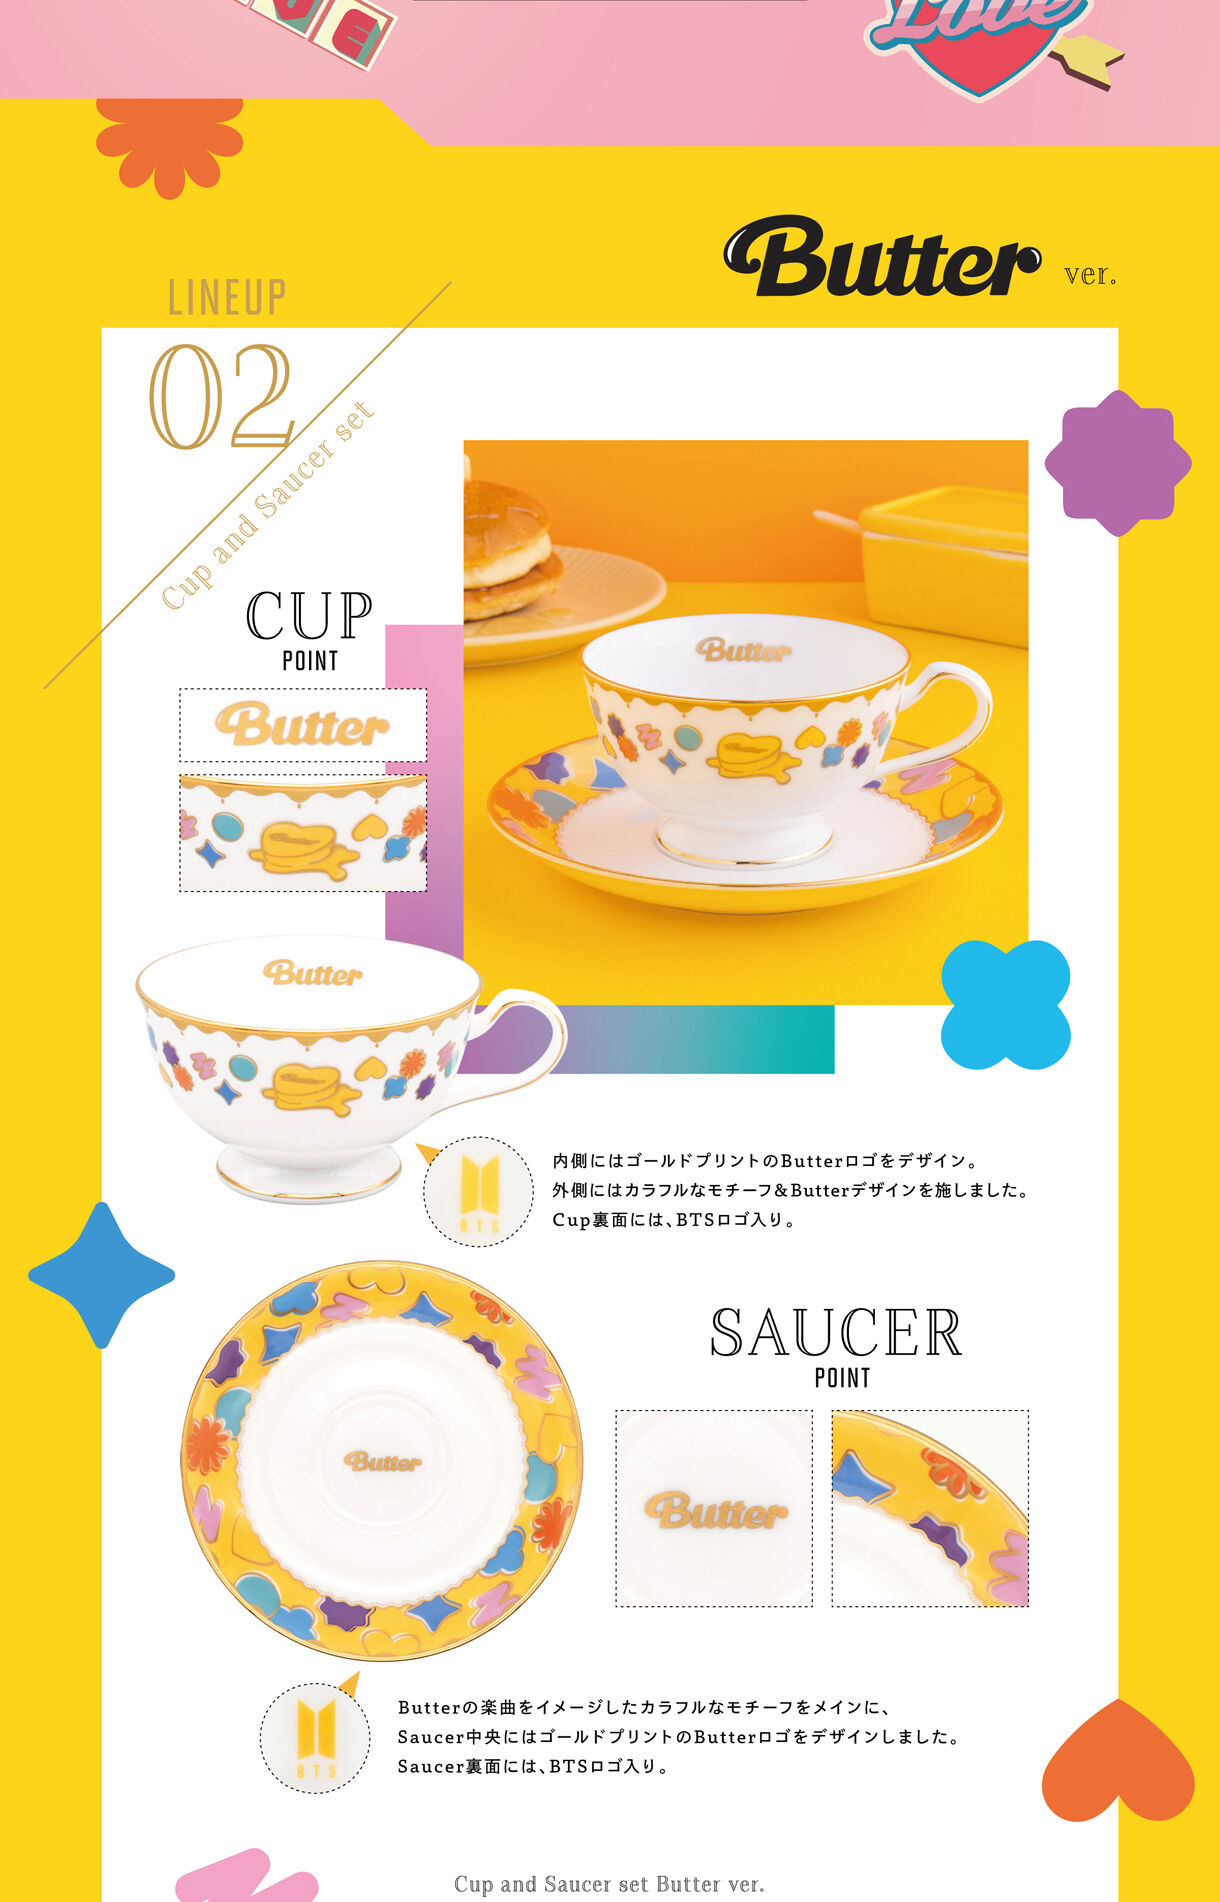 Noritake Cup＆Saucer set BTS Music Theme Boy With Luv ver./ Butter